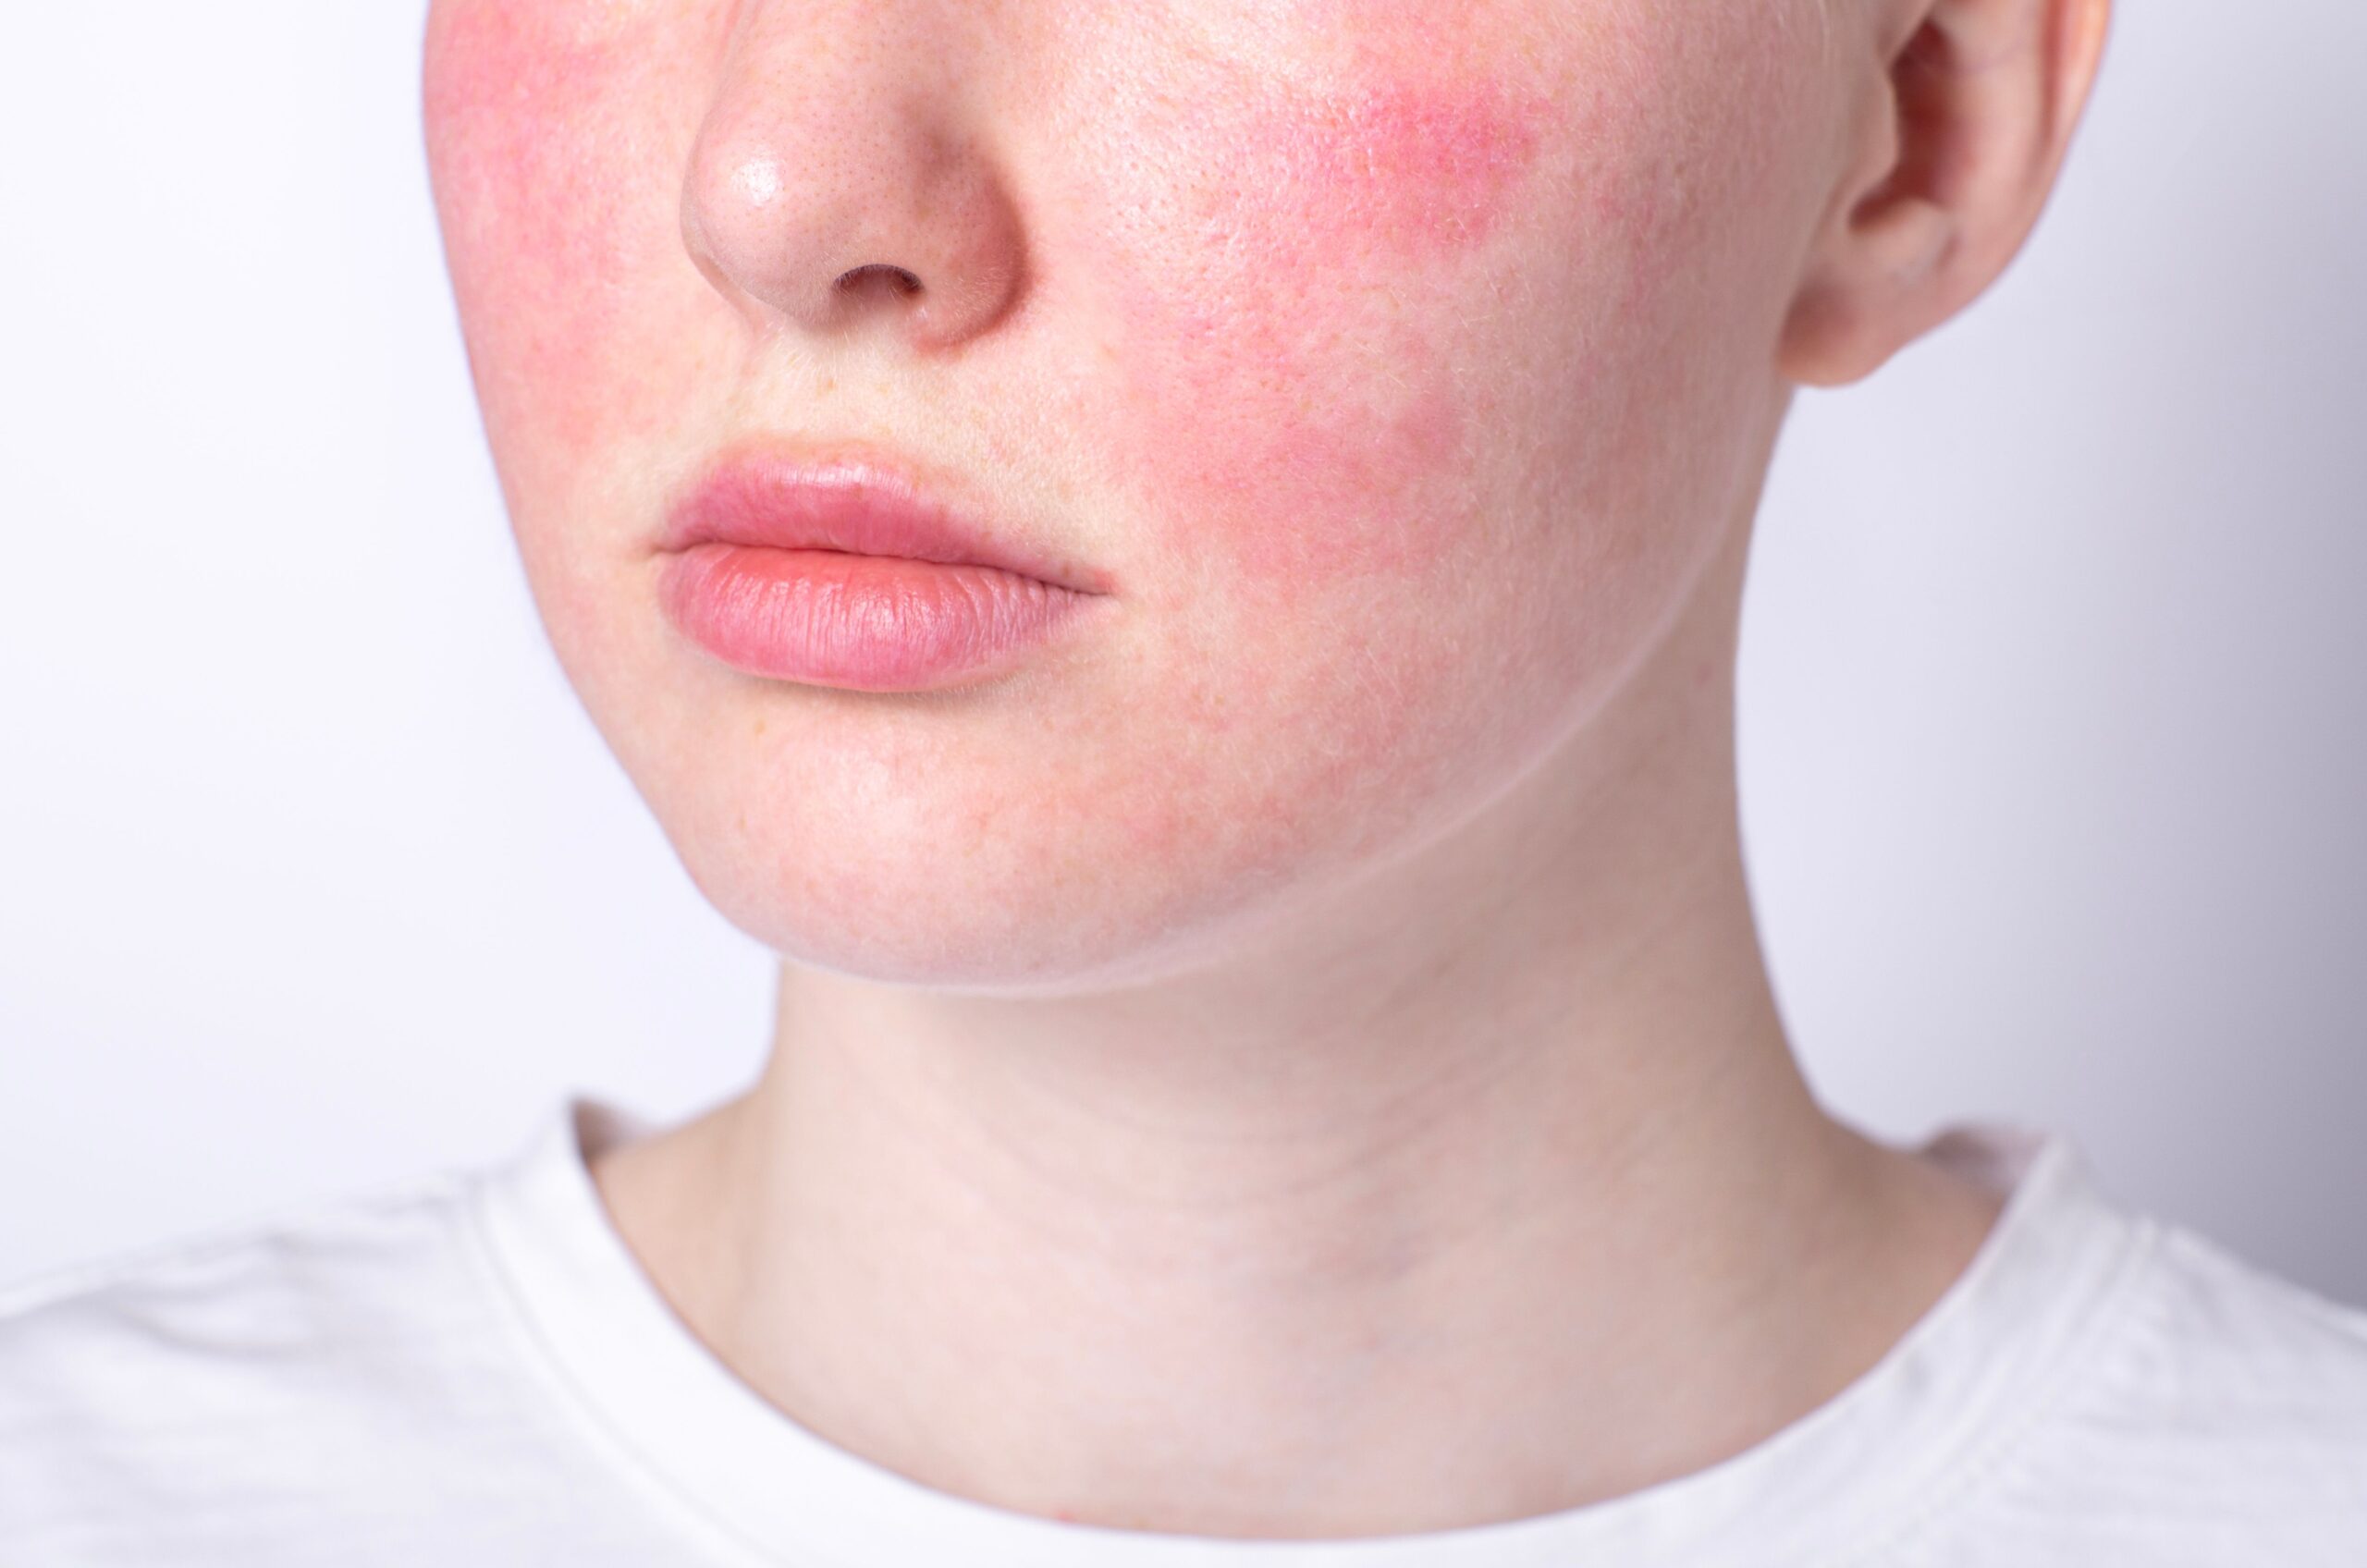 Review finds topical erythromycin, azithromycin and metronidazole the most common treatments for pediatric rosacea